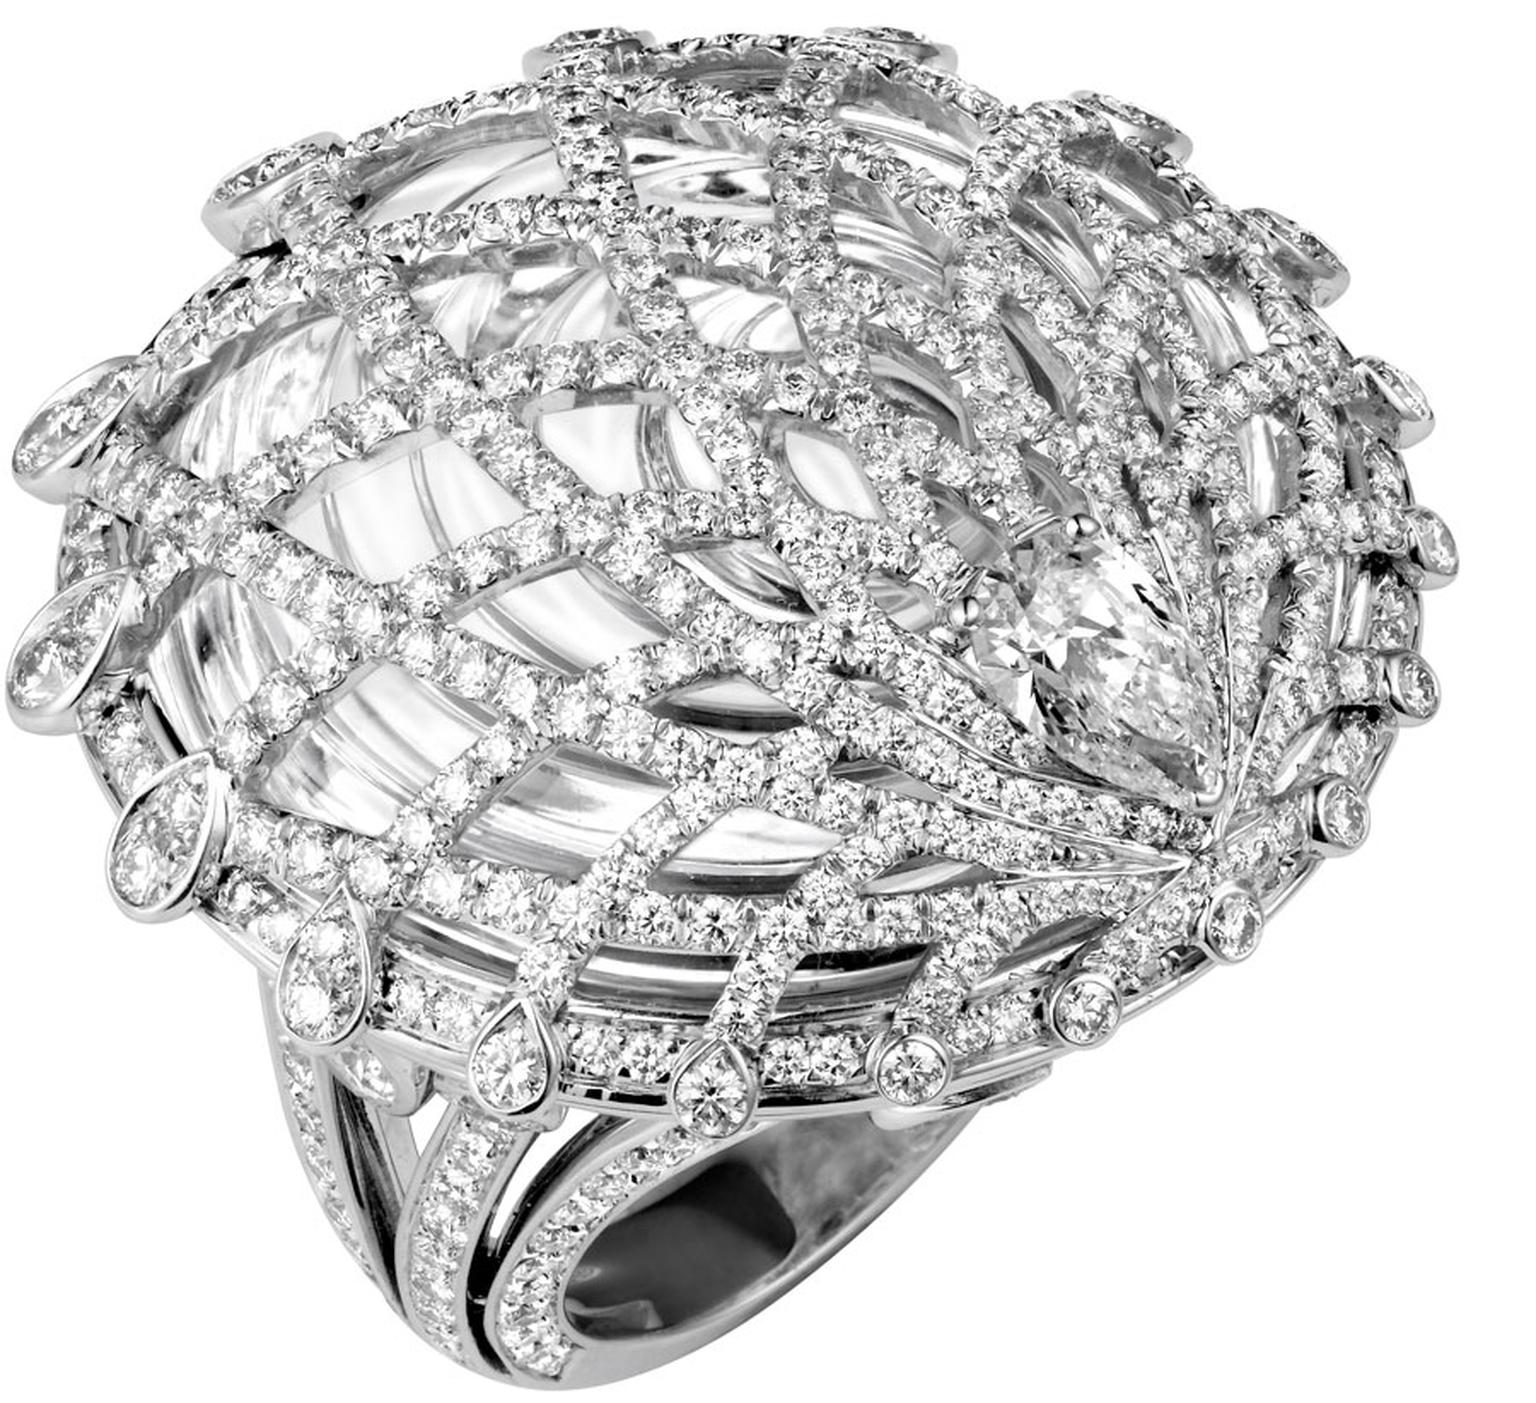 Cartier-Biennale-white-gold-ring